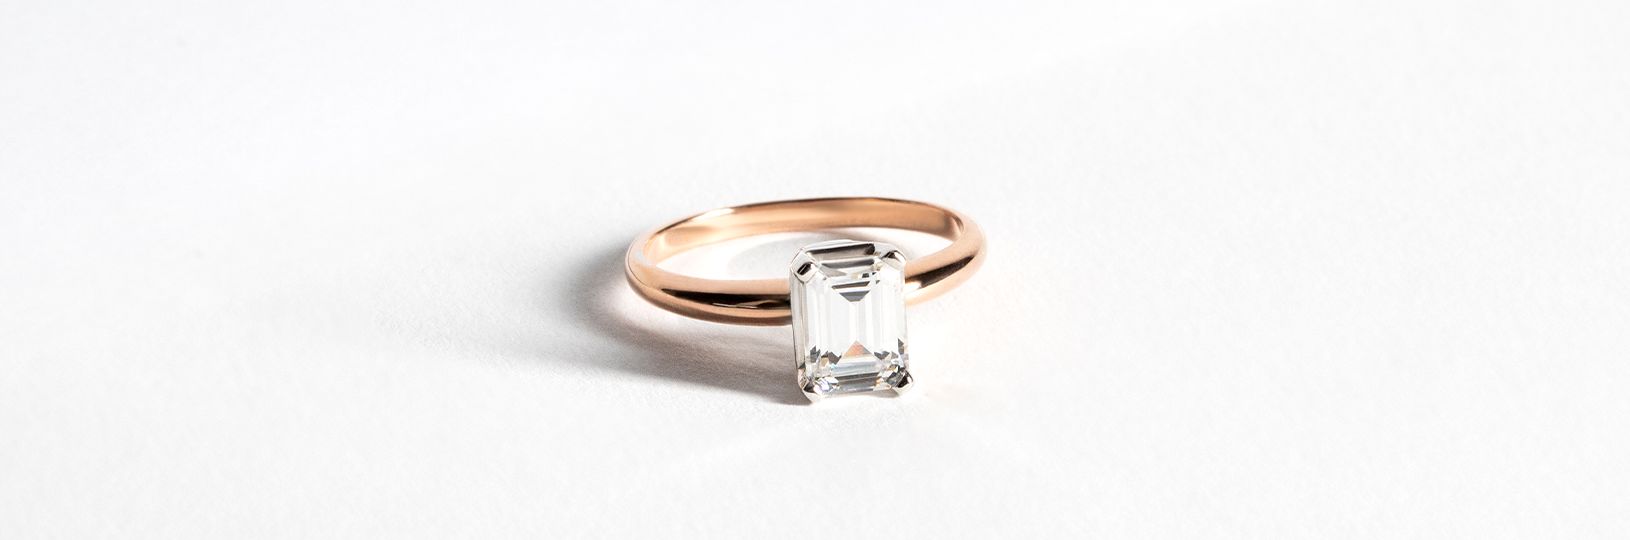 A solitaire rose gold engagement ring with an emerald cut stone